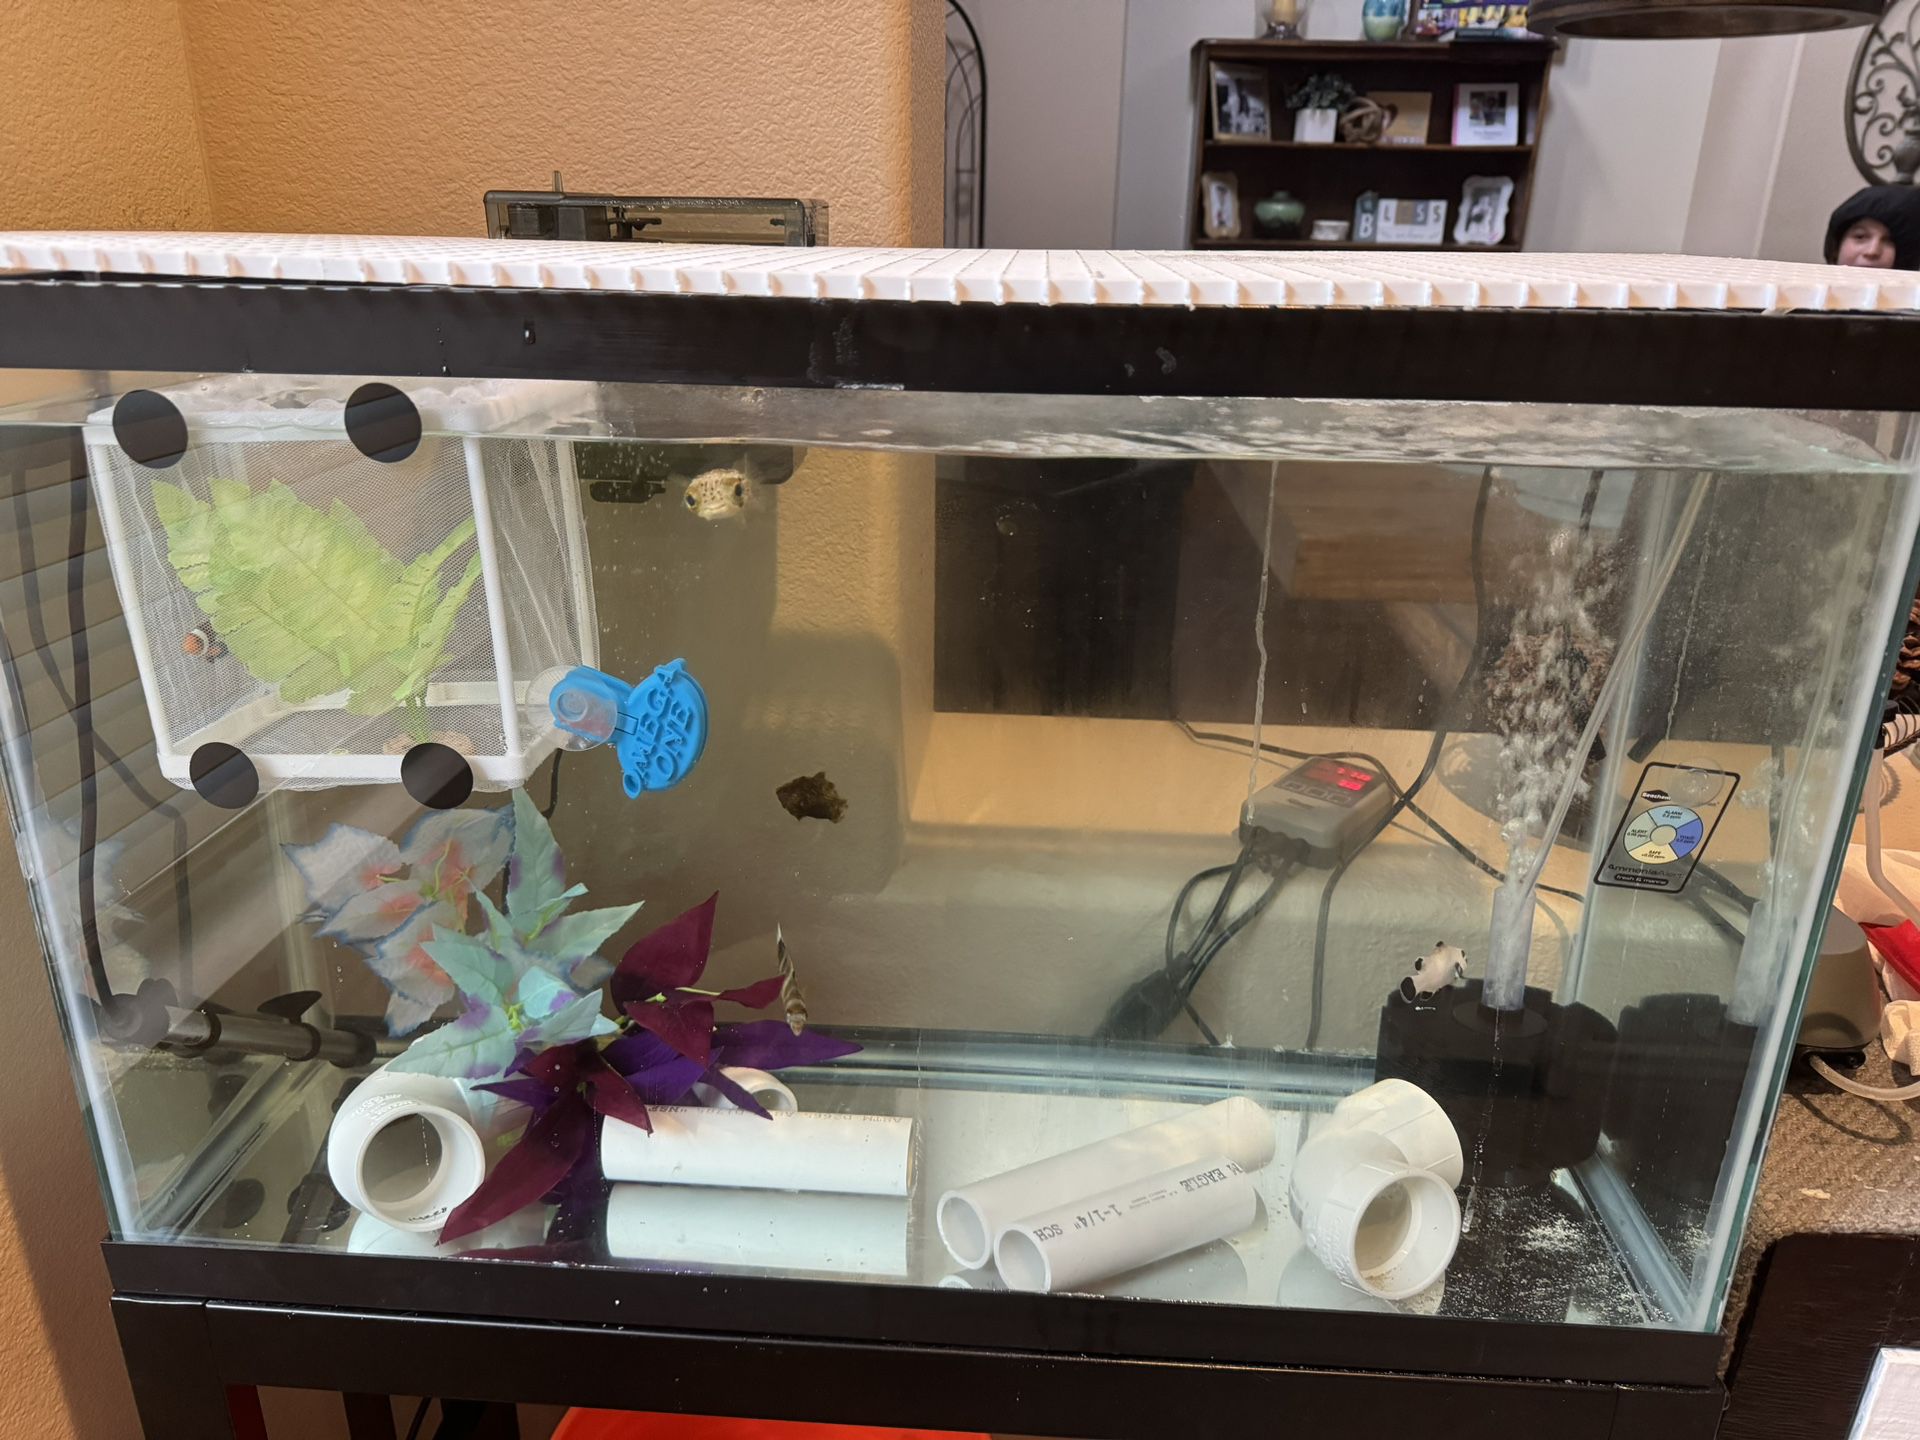 30g Fish tank And Stand (complete system)